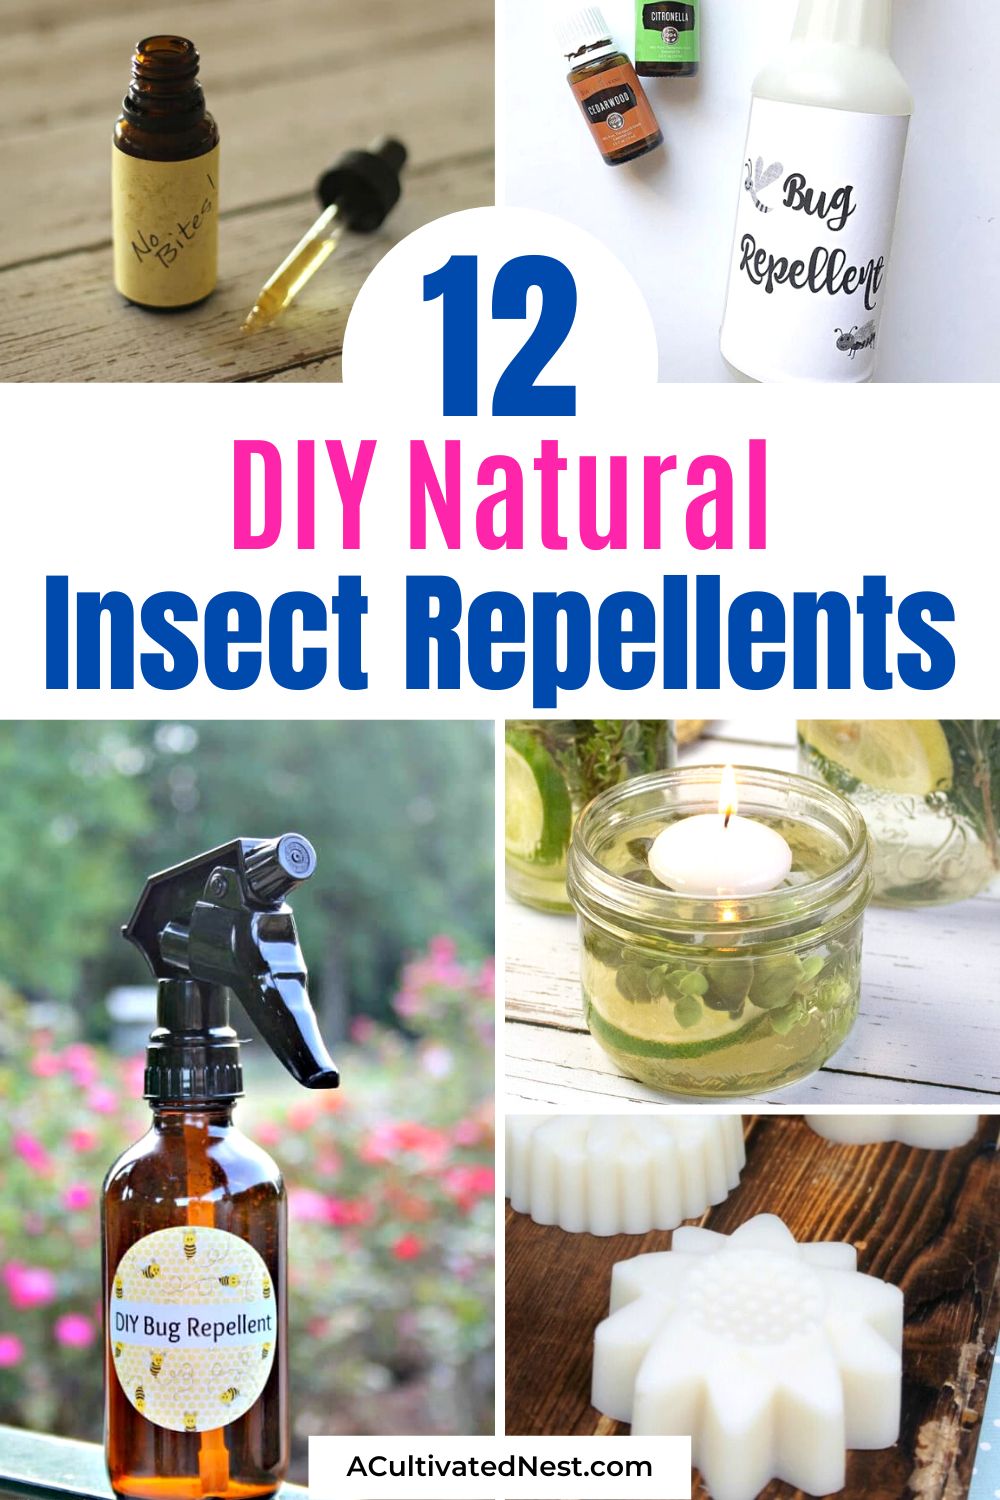 12 DIY Natural Insect Repellents- Protect yourself and your loved ones from insects the natural way! Discover 12 effective DIY insect repellents that are easy to make and free from harmful chemicals. | #NaturalInsectRepellent #DIYBugSpray #OutdoorHacks #DIYInsectRepellent #ACultivatedNest